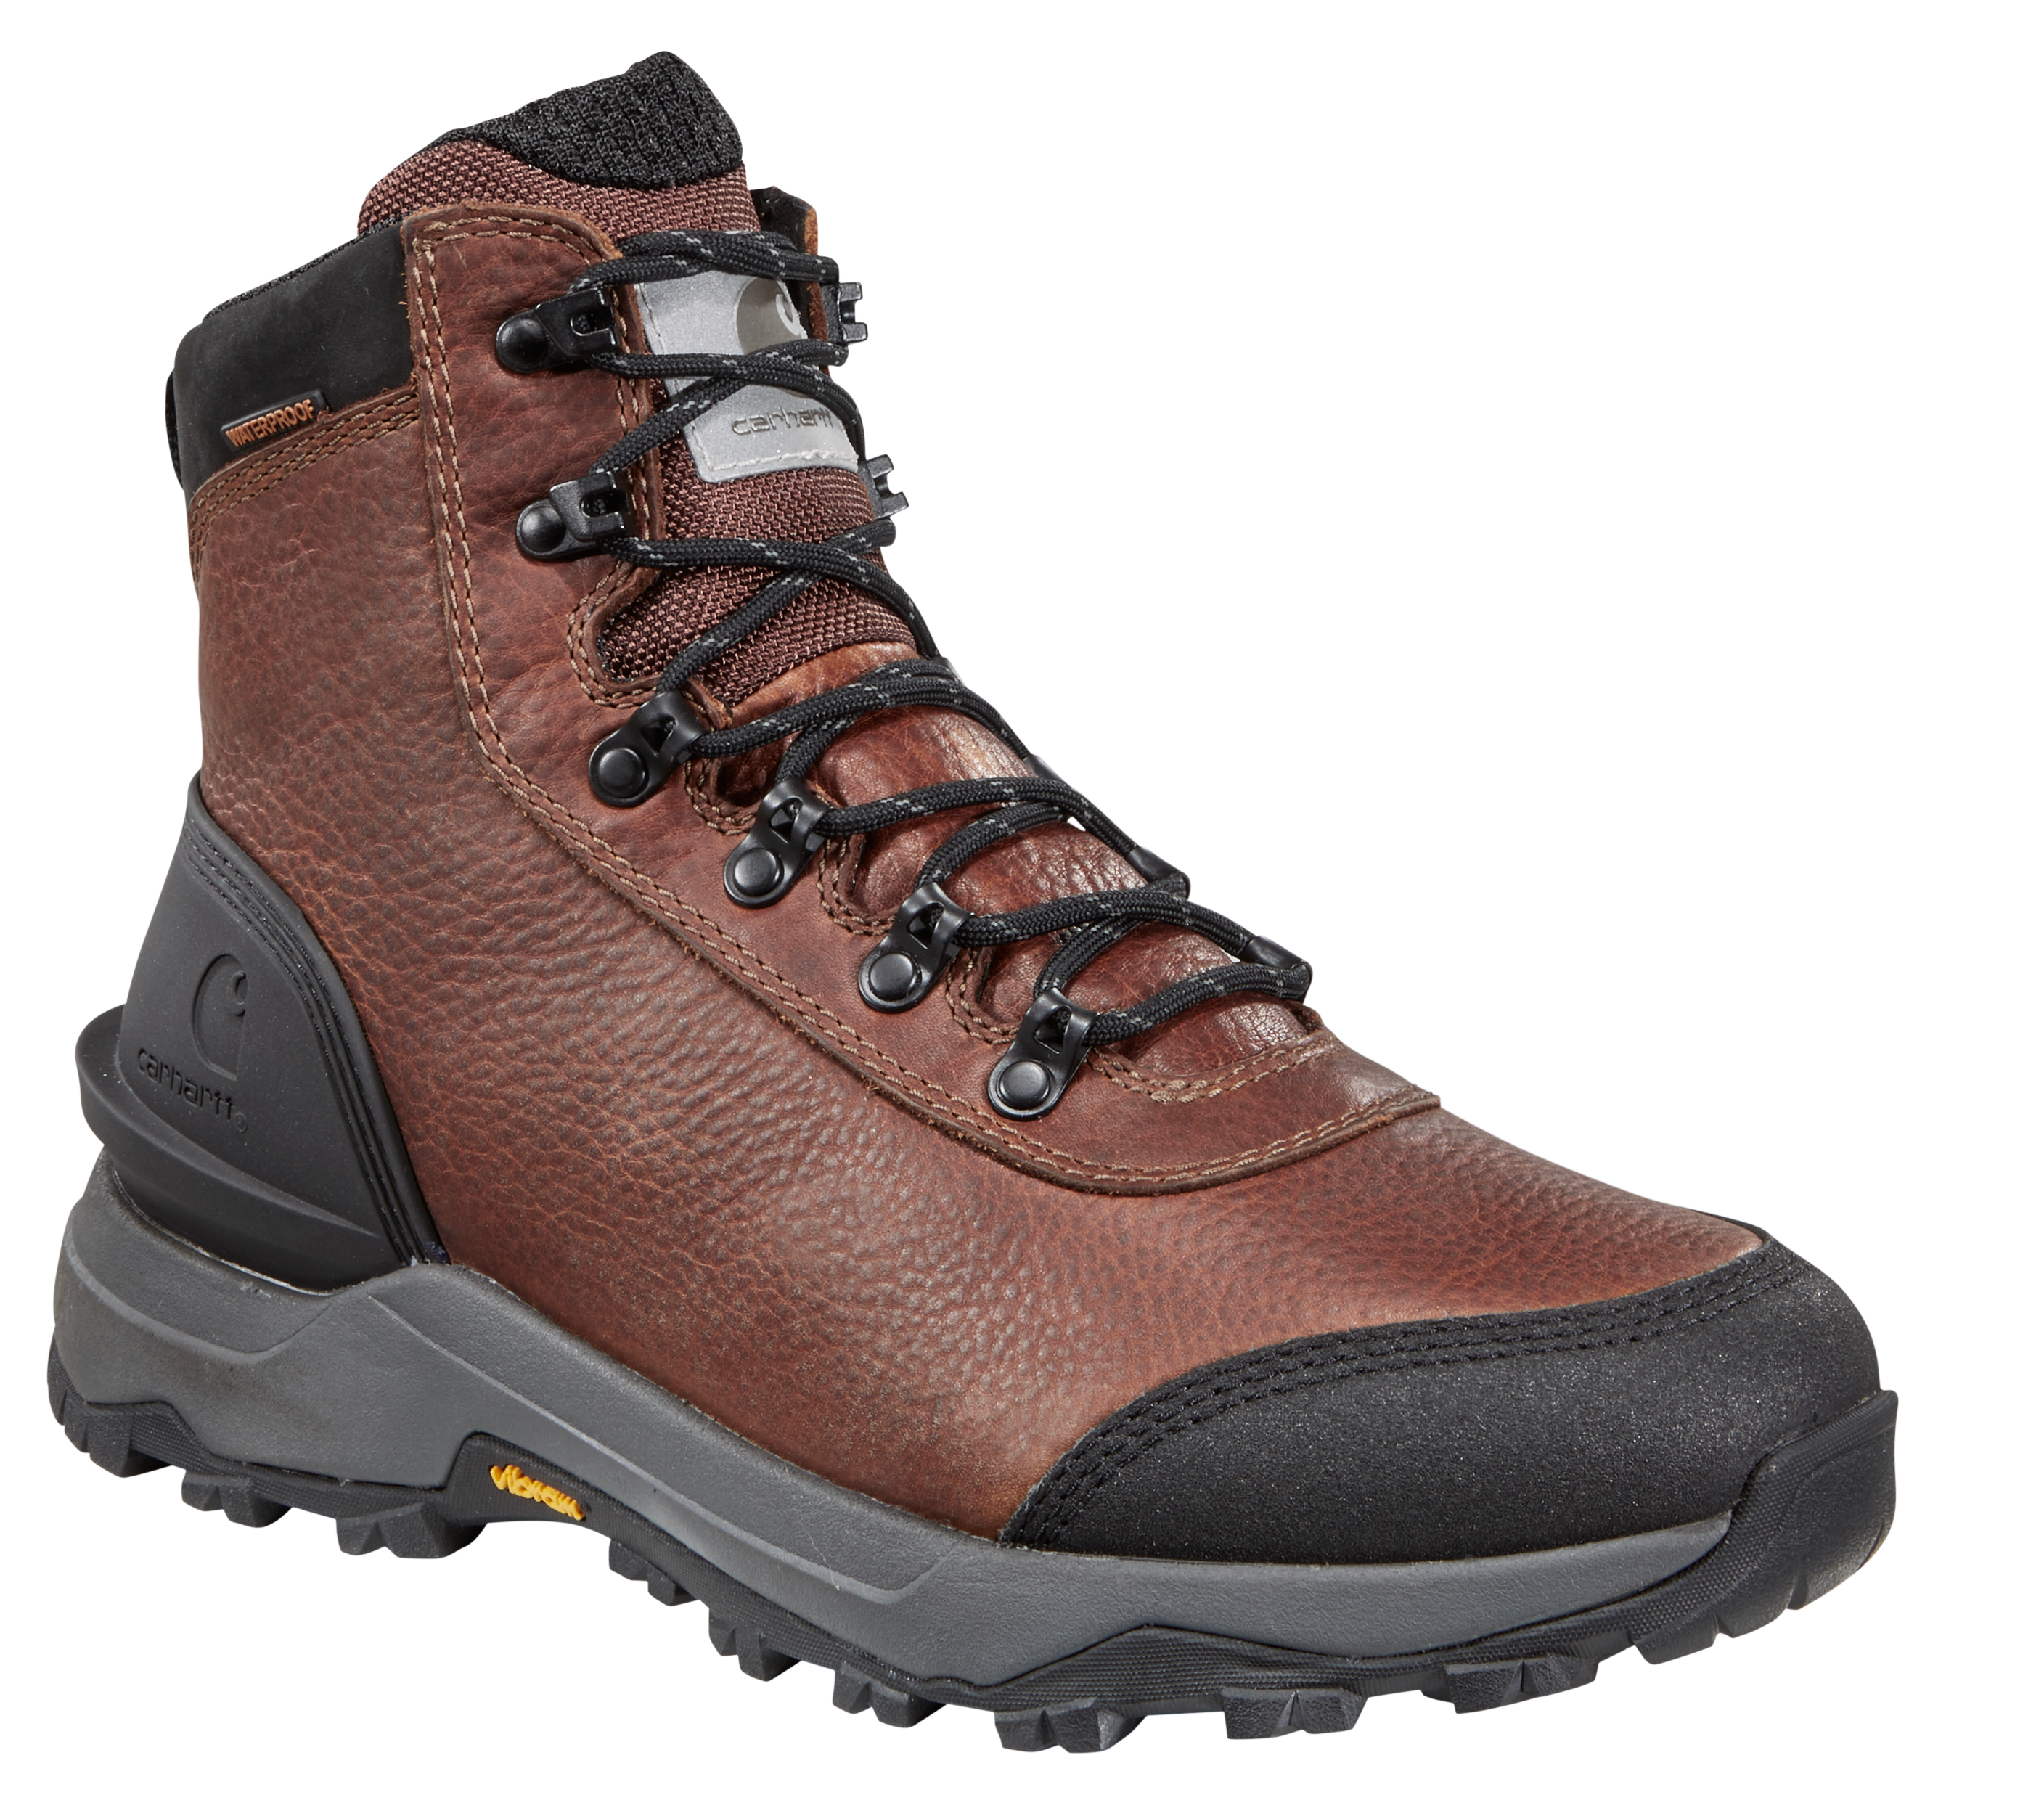 Carhartt Outdoor Hiker Insulated Waterproof Hiking Boots for Men - Mineral Red - 9.5M